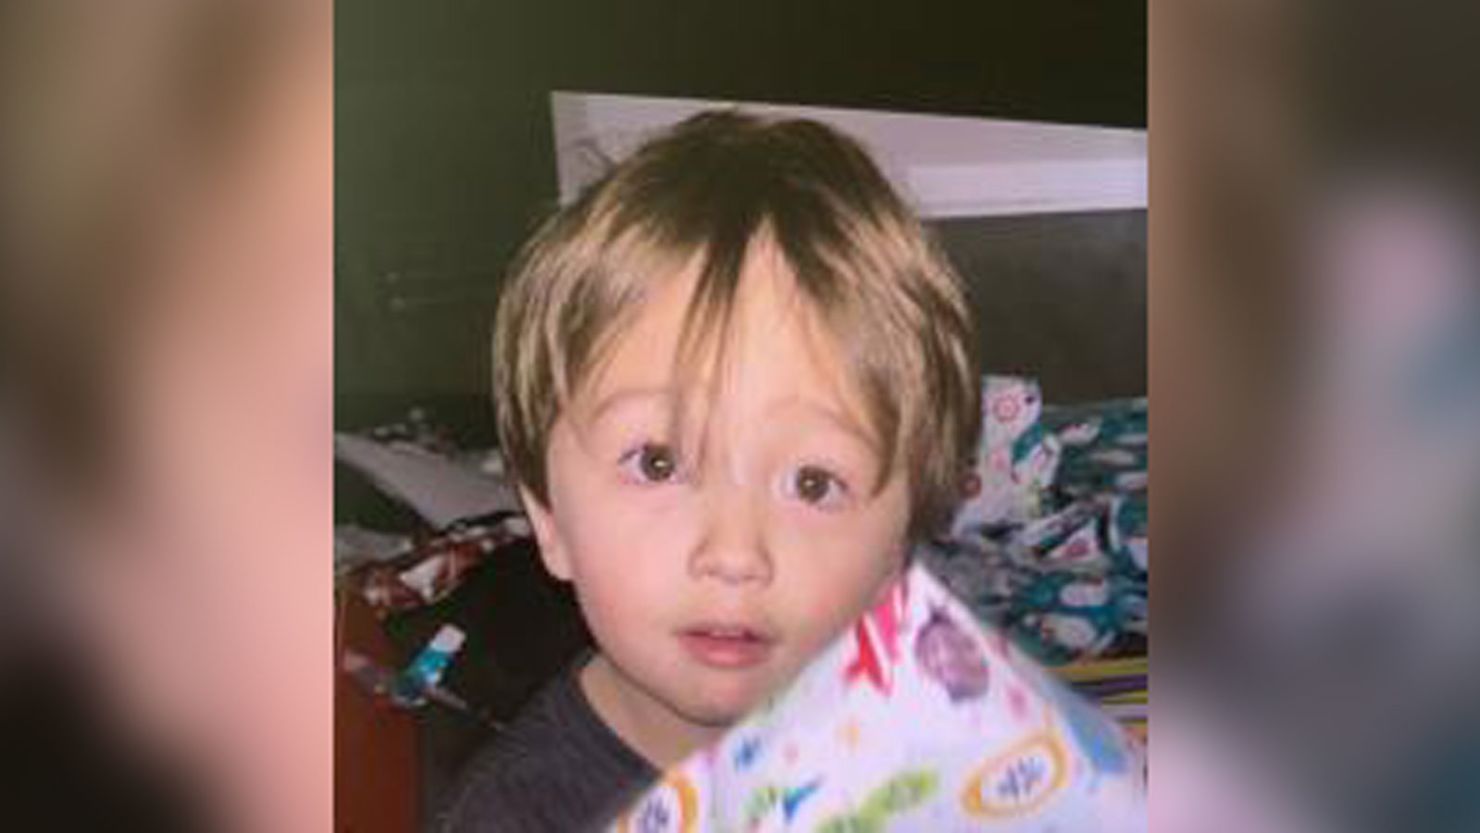 Elijah Vue has been missing for two weeks, and police are asking the public to help find him.